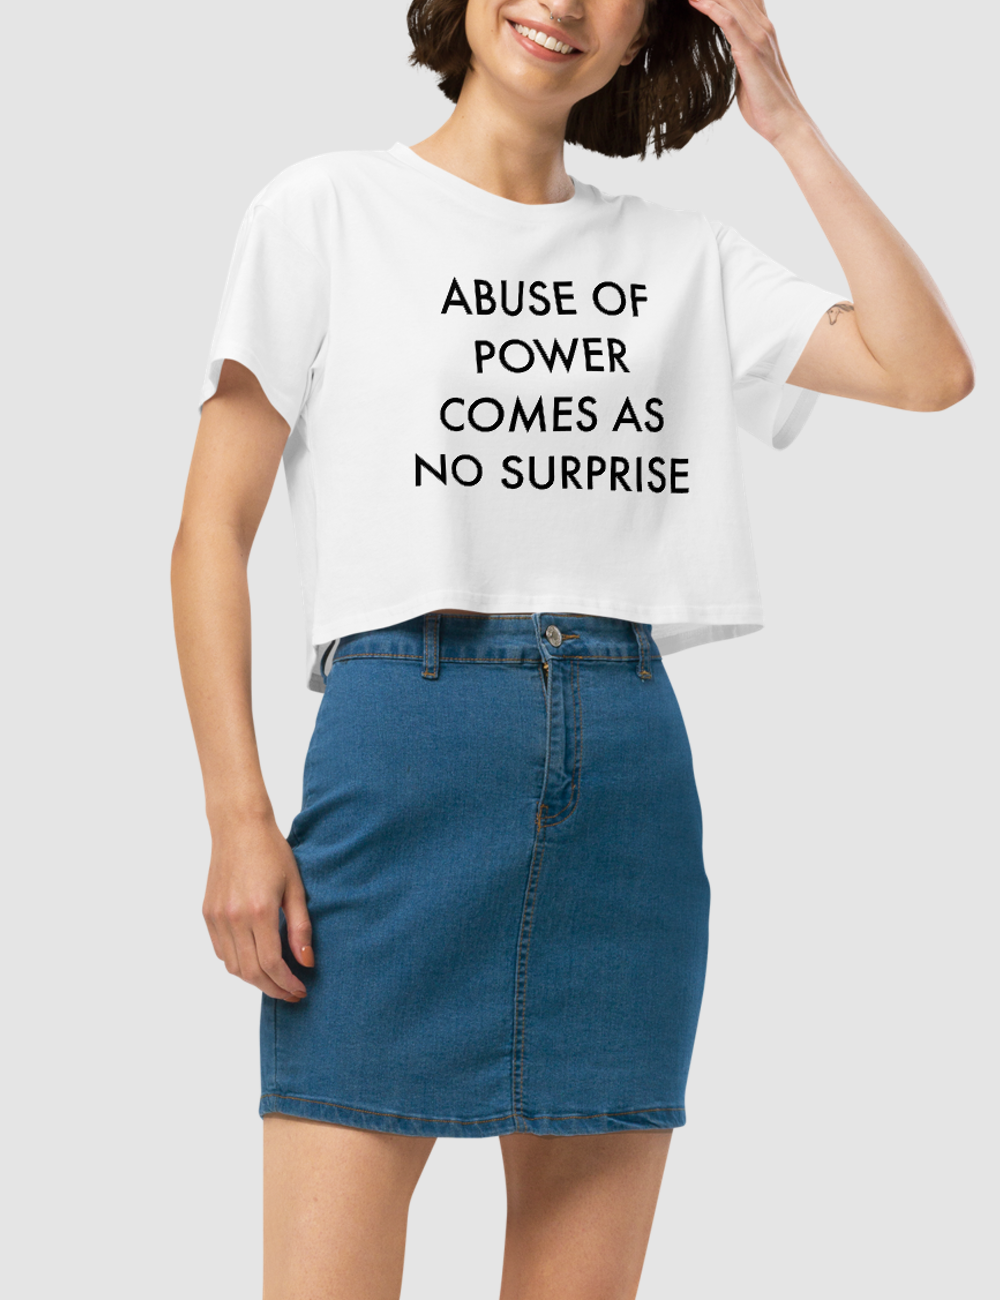 Abuse Of Power Comes As No Surprise Women's Relaxed Crop Top T-Shirt OniTakai